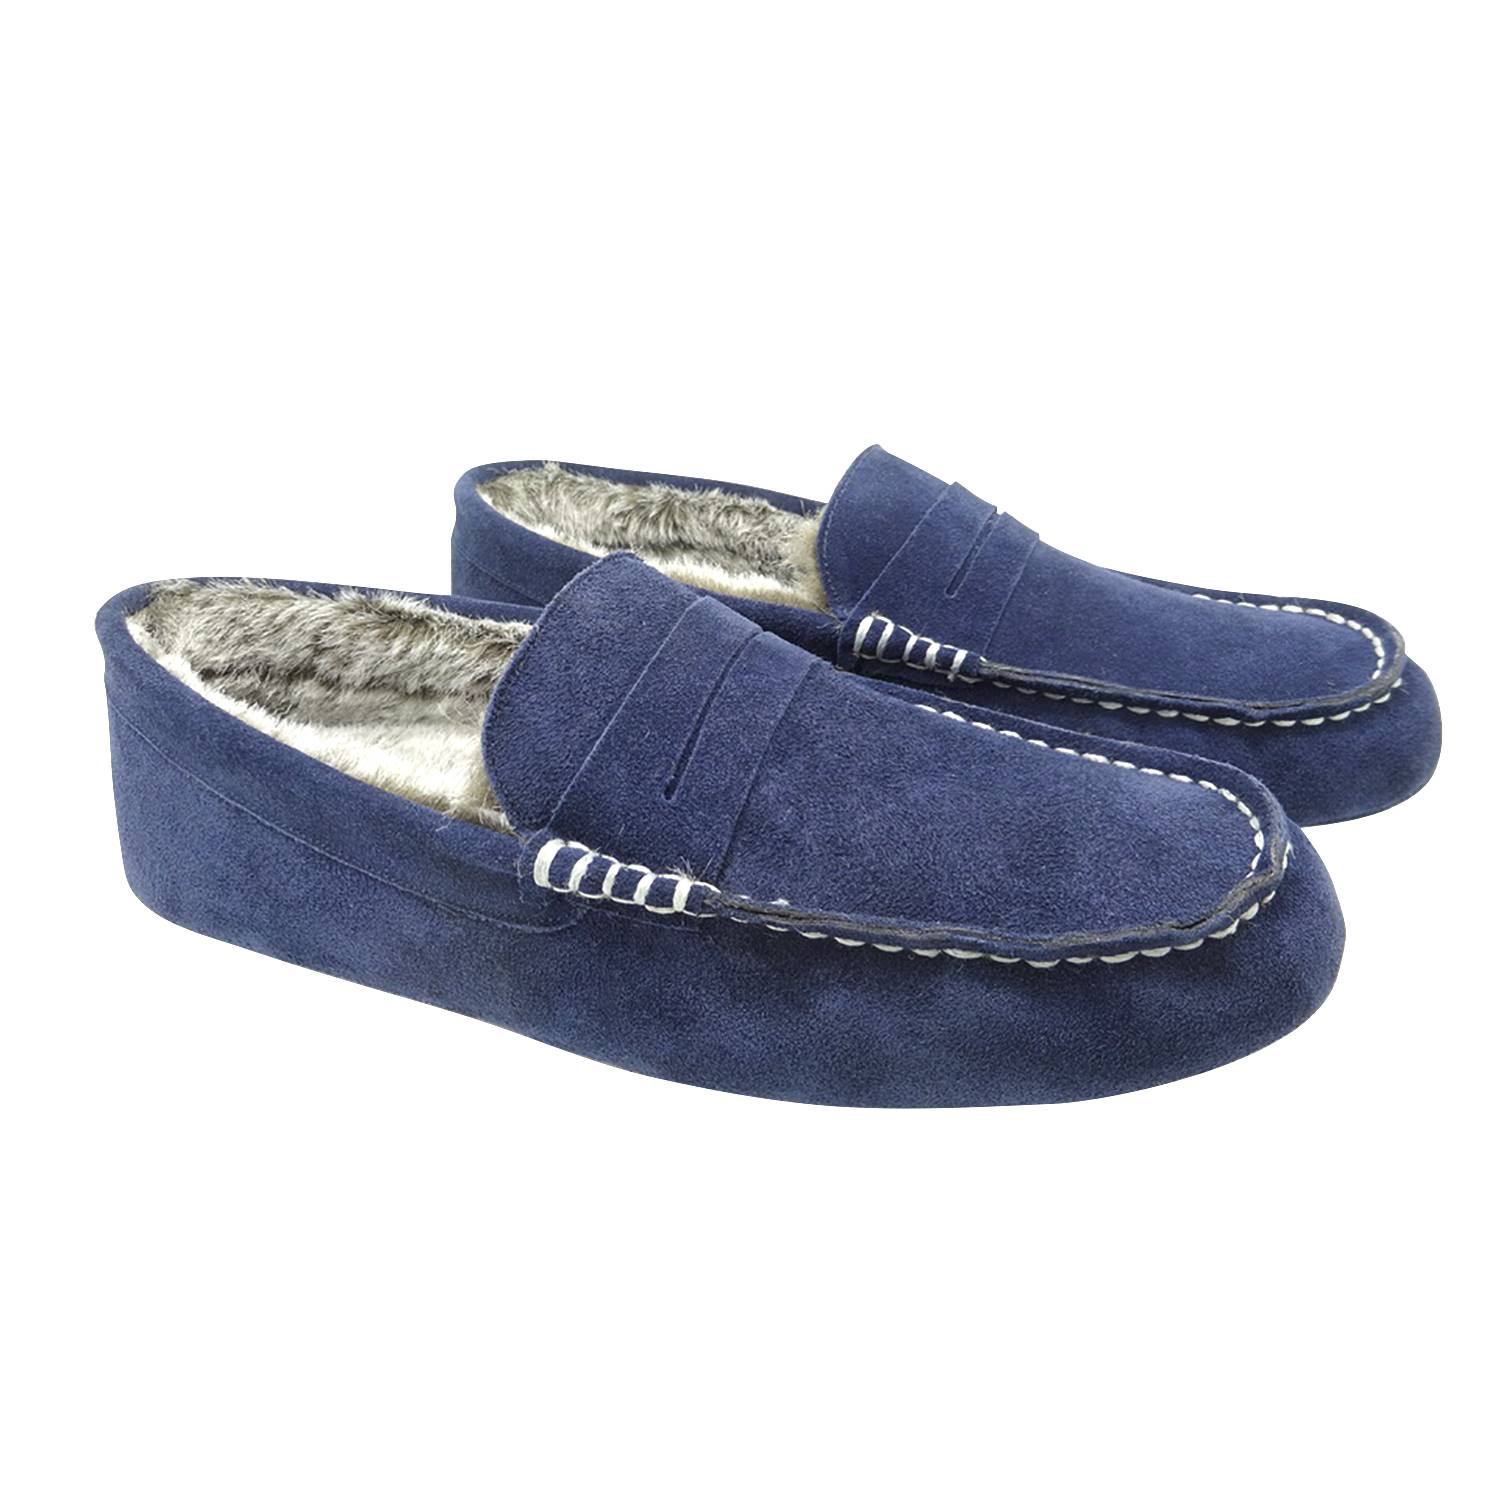 Mens Slippers Moccasins for Men Cozy Pile Lined with Microsuede Upper Indoor Outdoor On House Shoes Featured Image